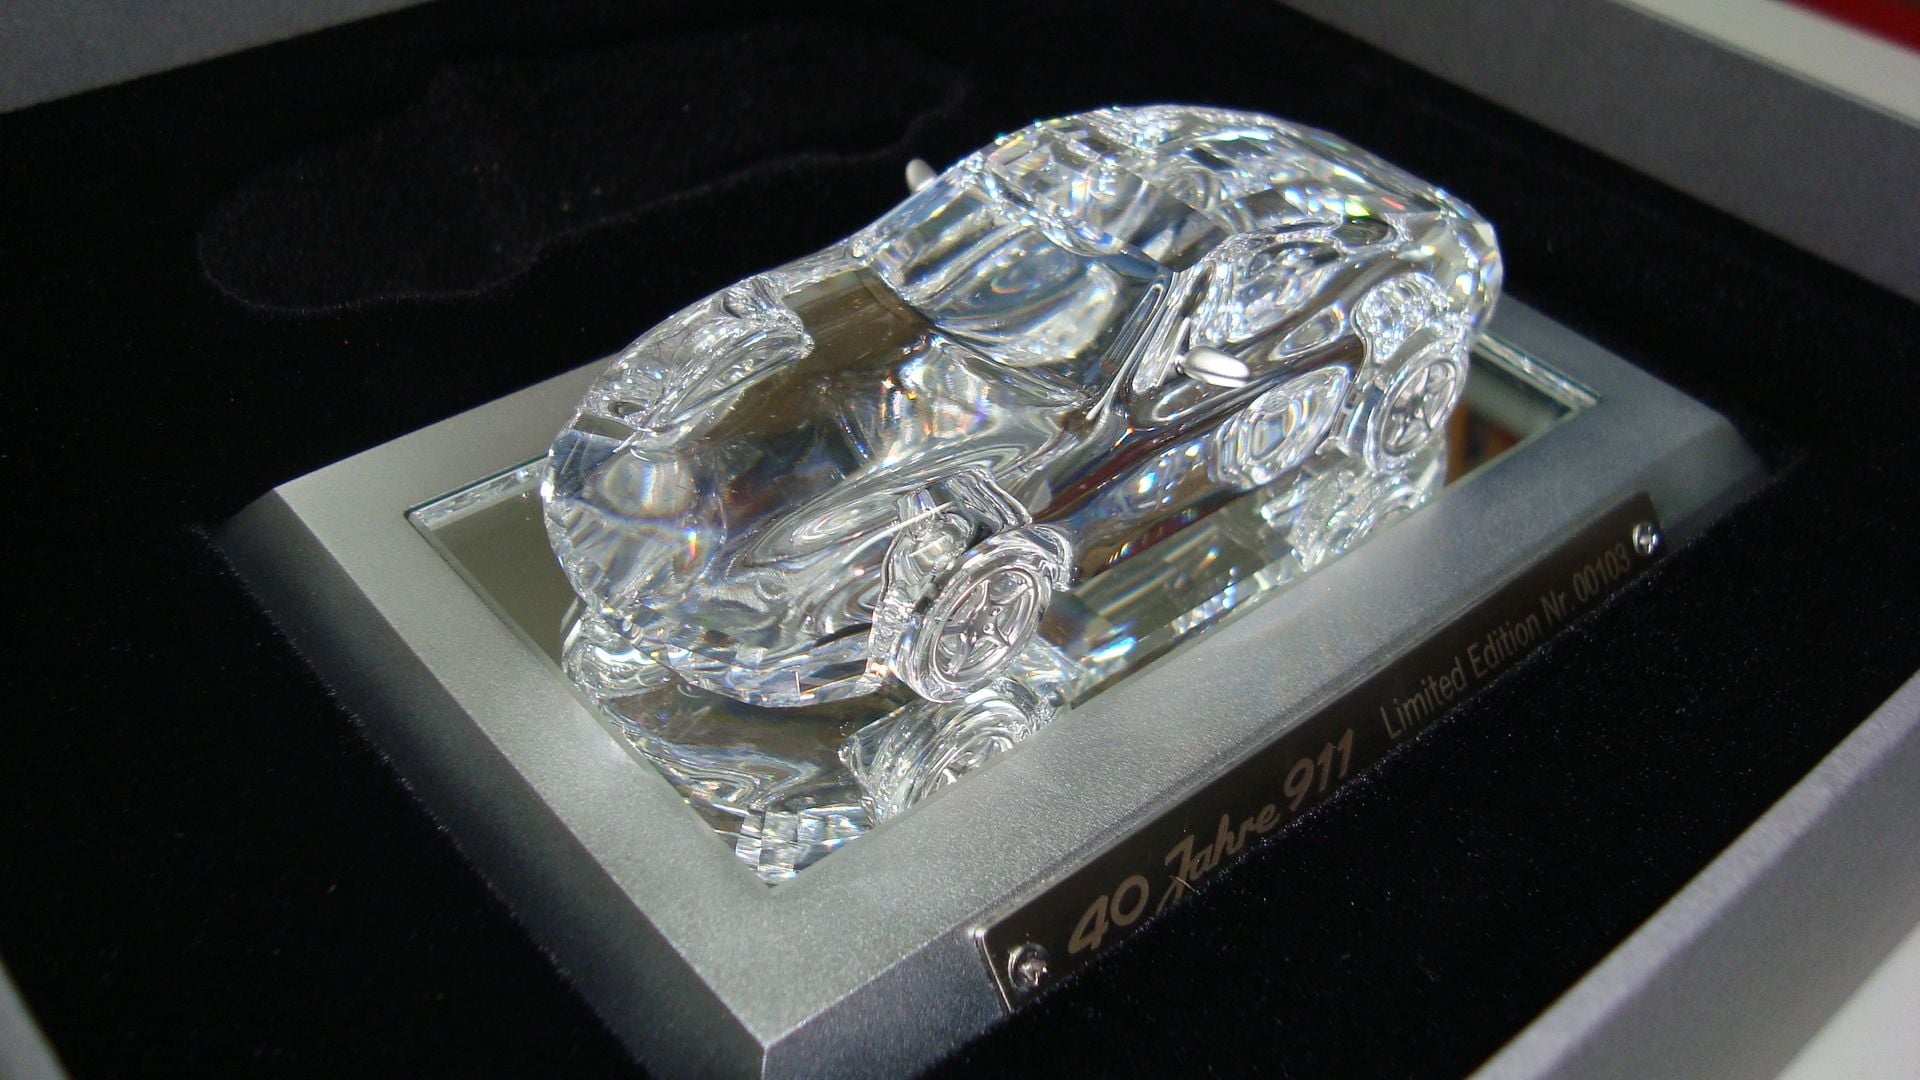 Miscellaneous - FS_Genuine Limited Edition Swarovski Crystal '40 Years of 911', Brand New NLA - New - All Years Porsche 911 - Austin, TX 78701, United States